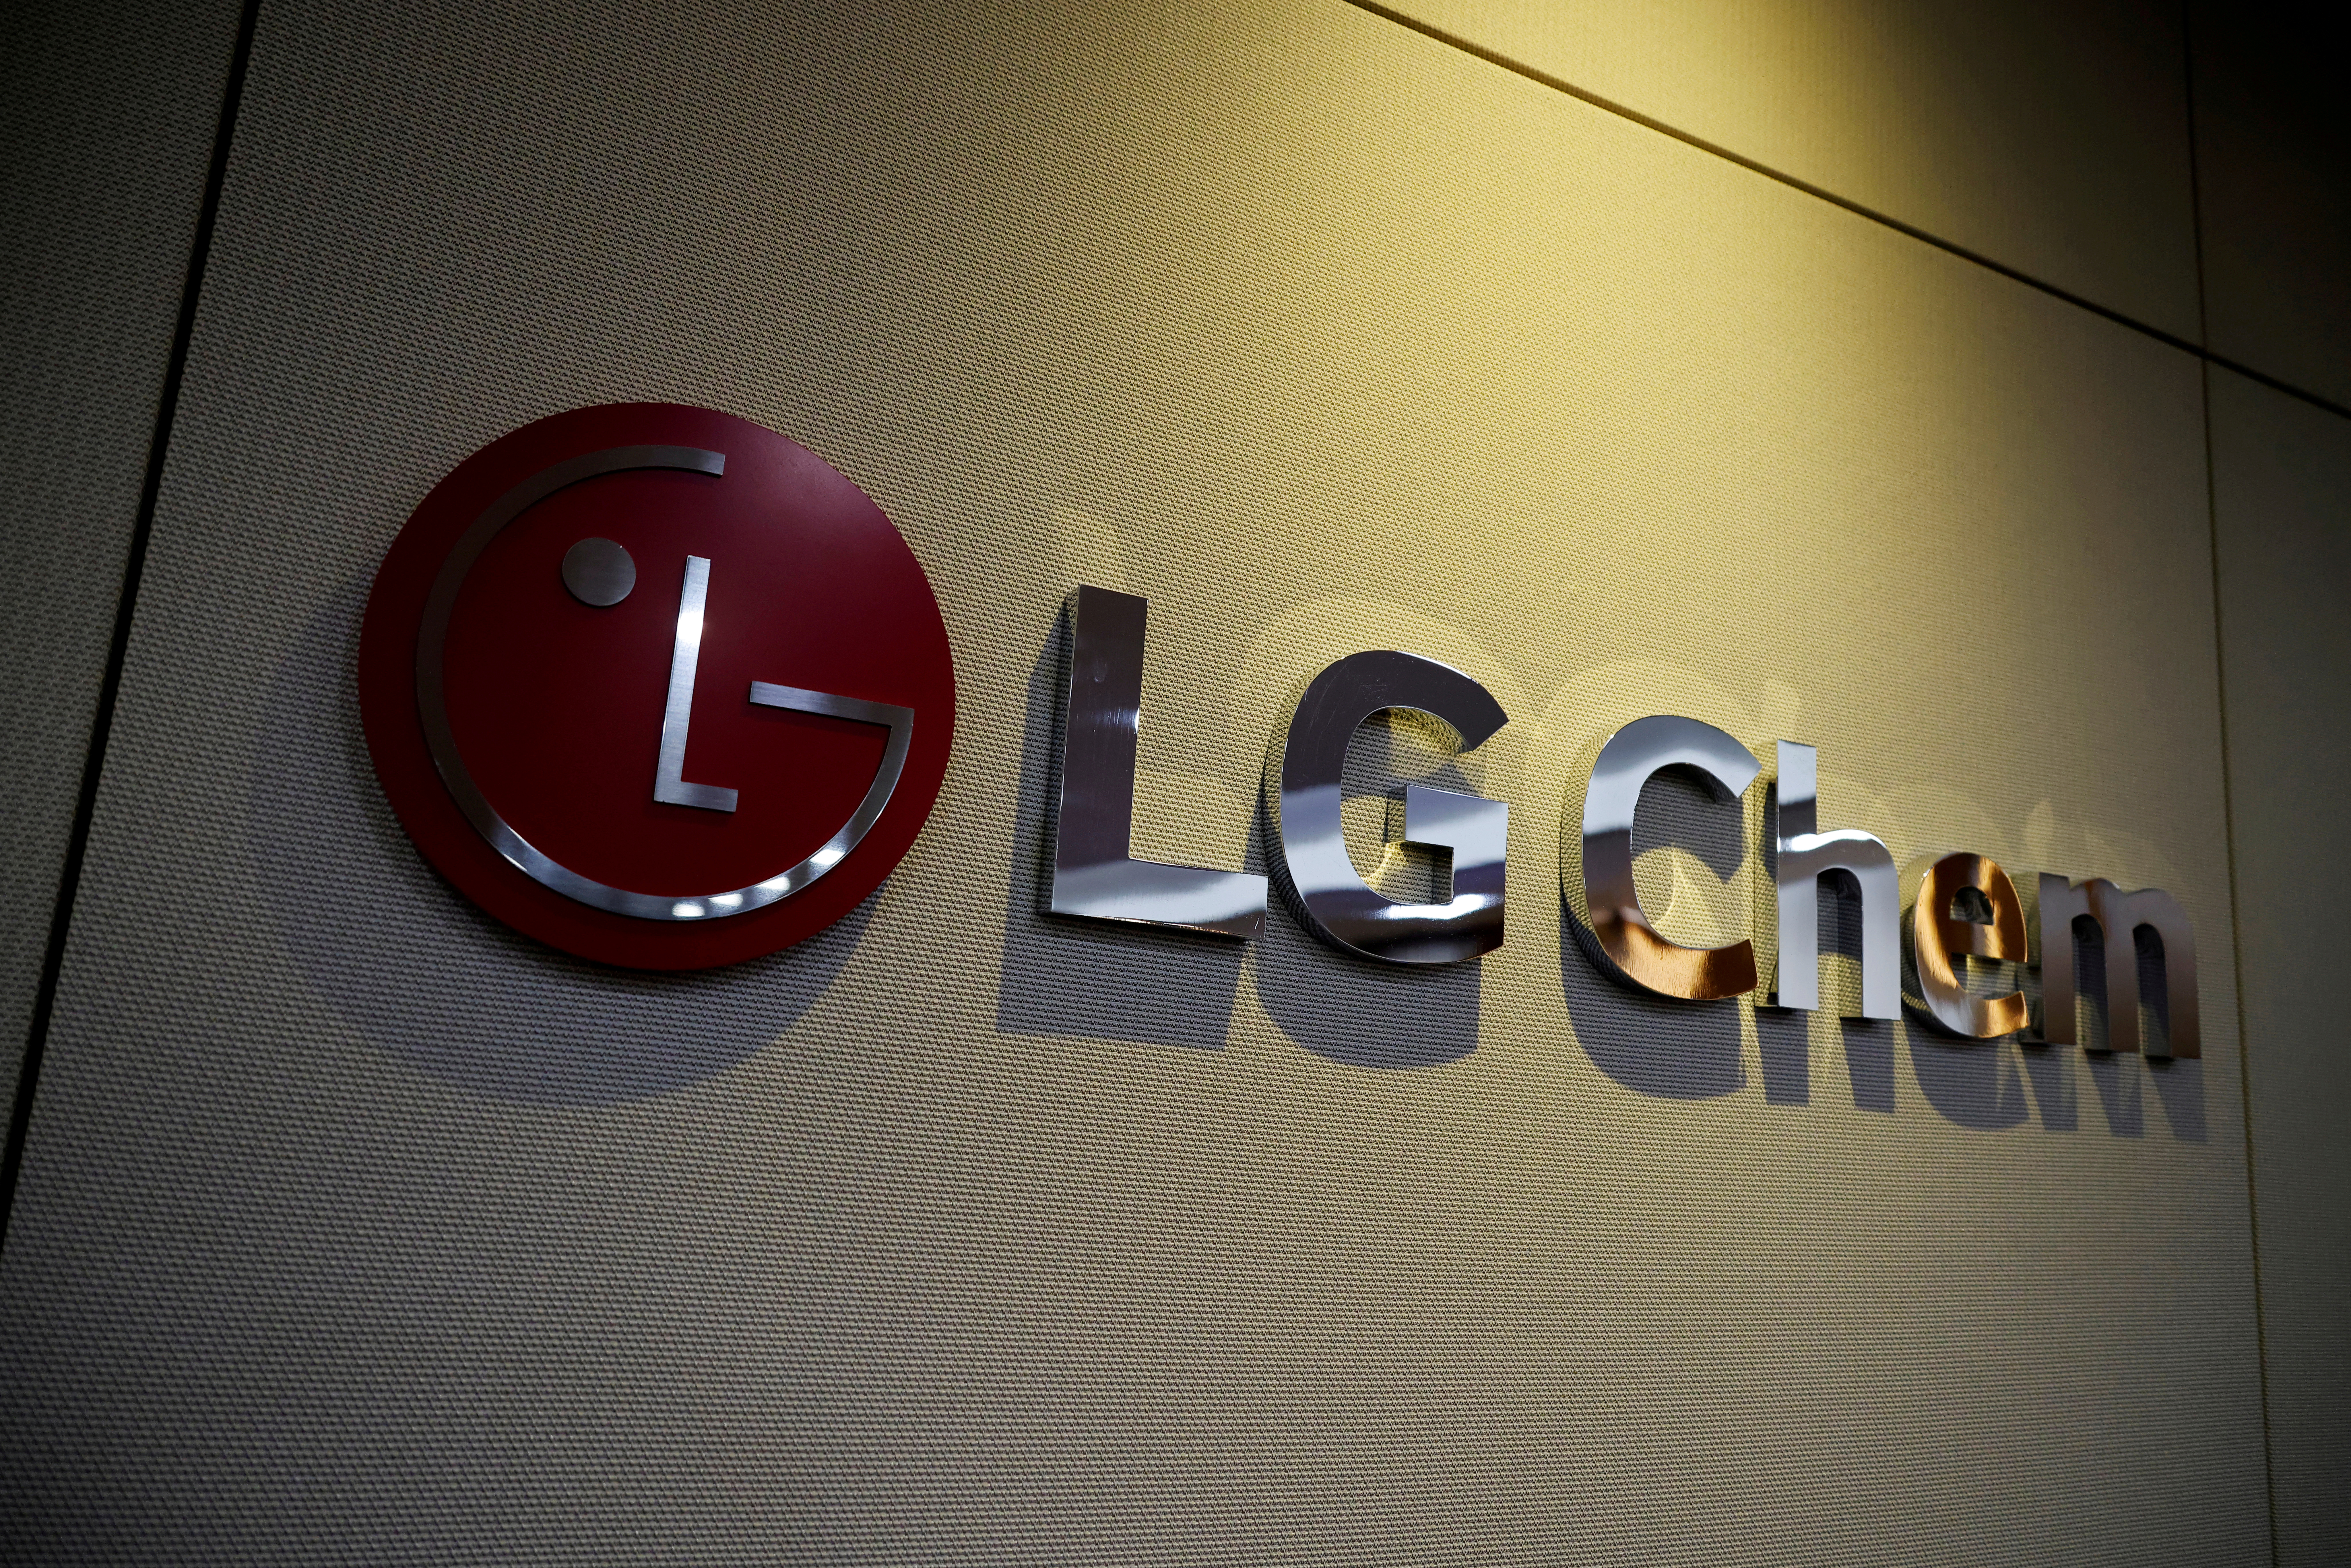 The logo of LG Chem is seen at its office building in Seoul, South Korea, October 16, 2020.   REUTERS/Kim Hong-Ji